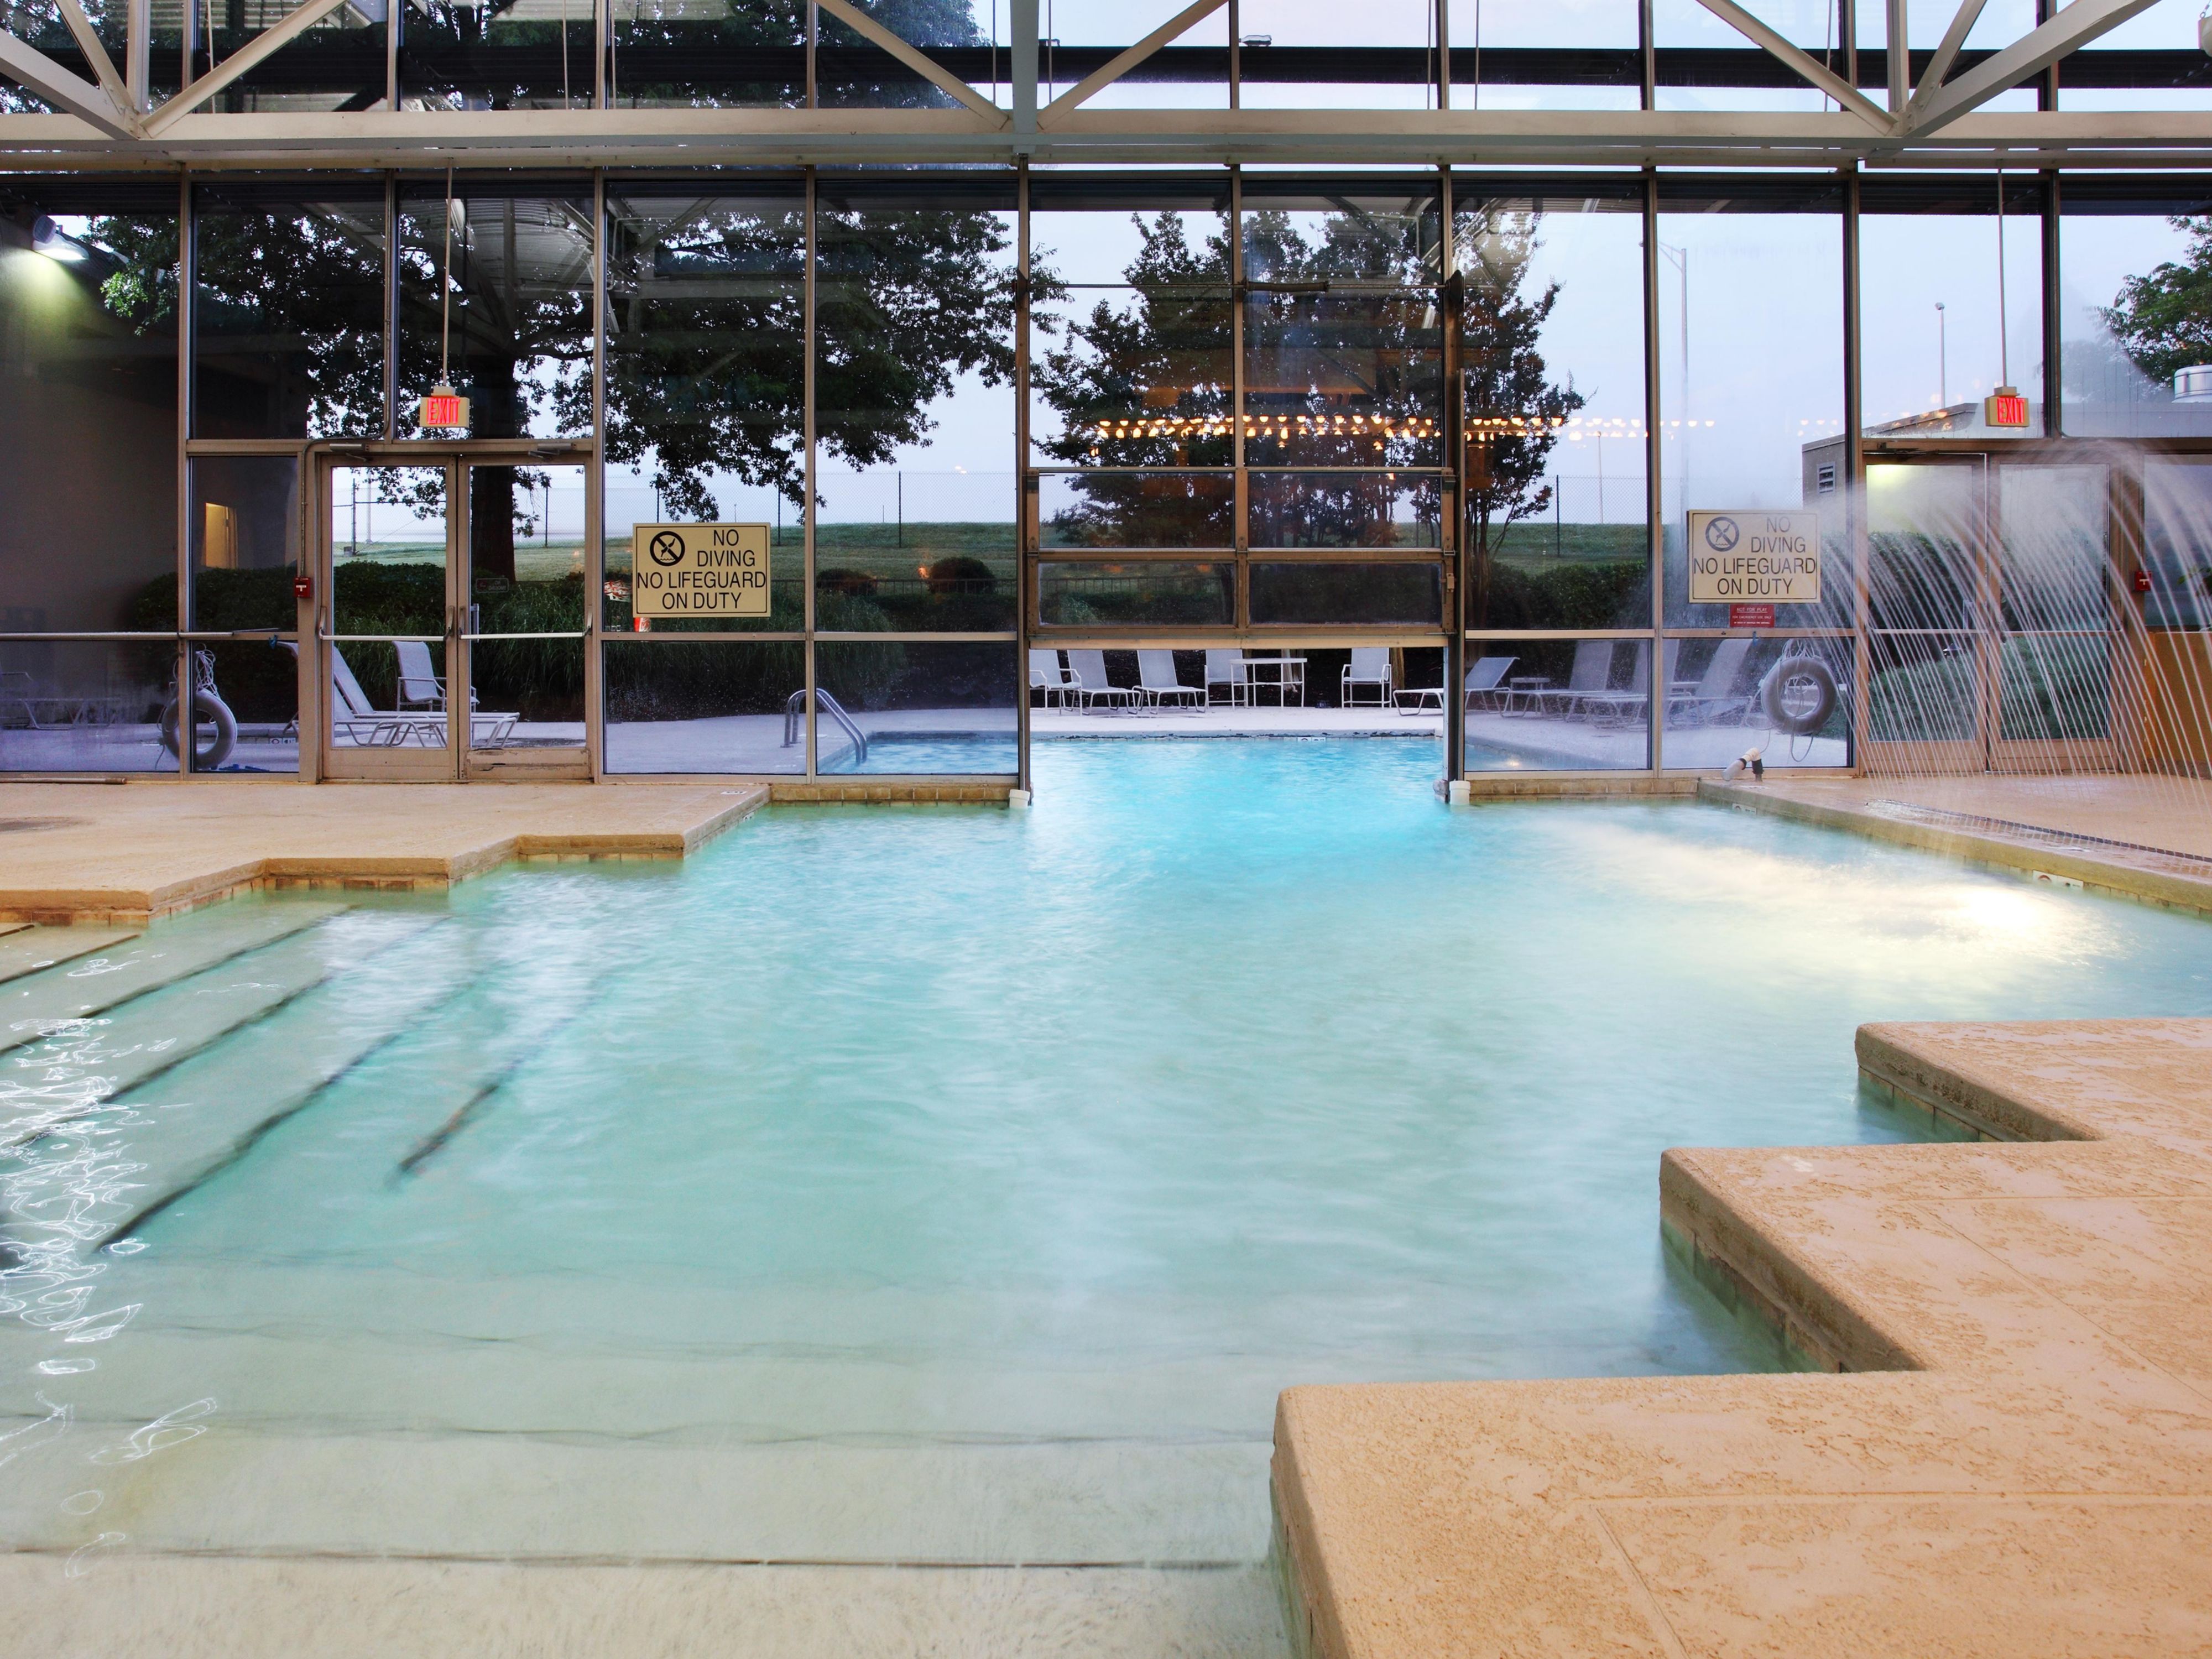 Enjoy some rest and relaxation by our heated indoor pool and hot tub. 